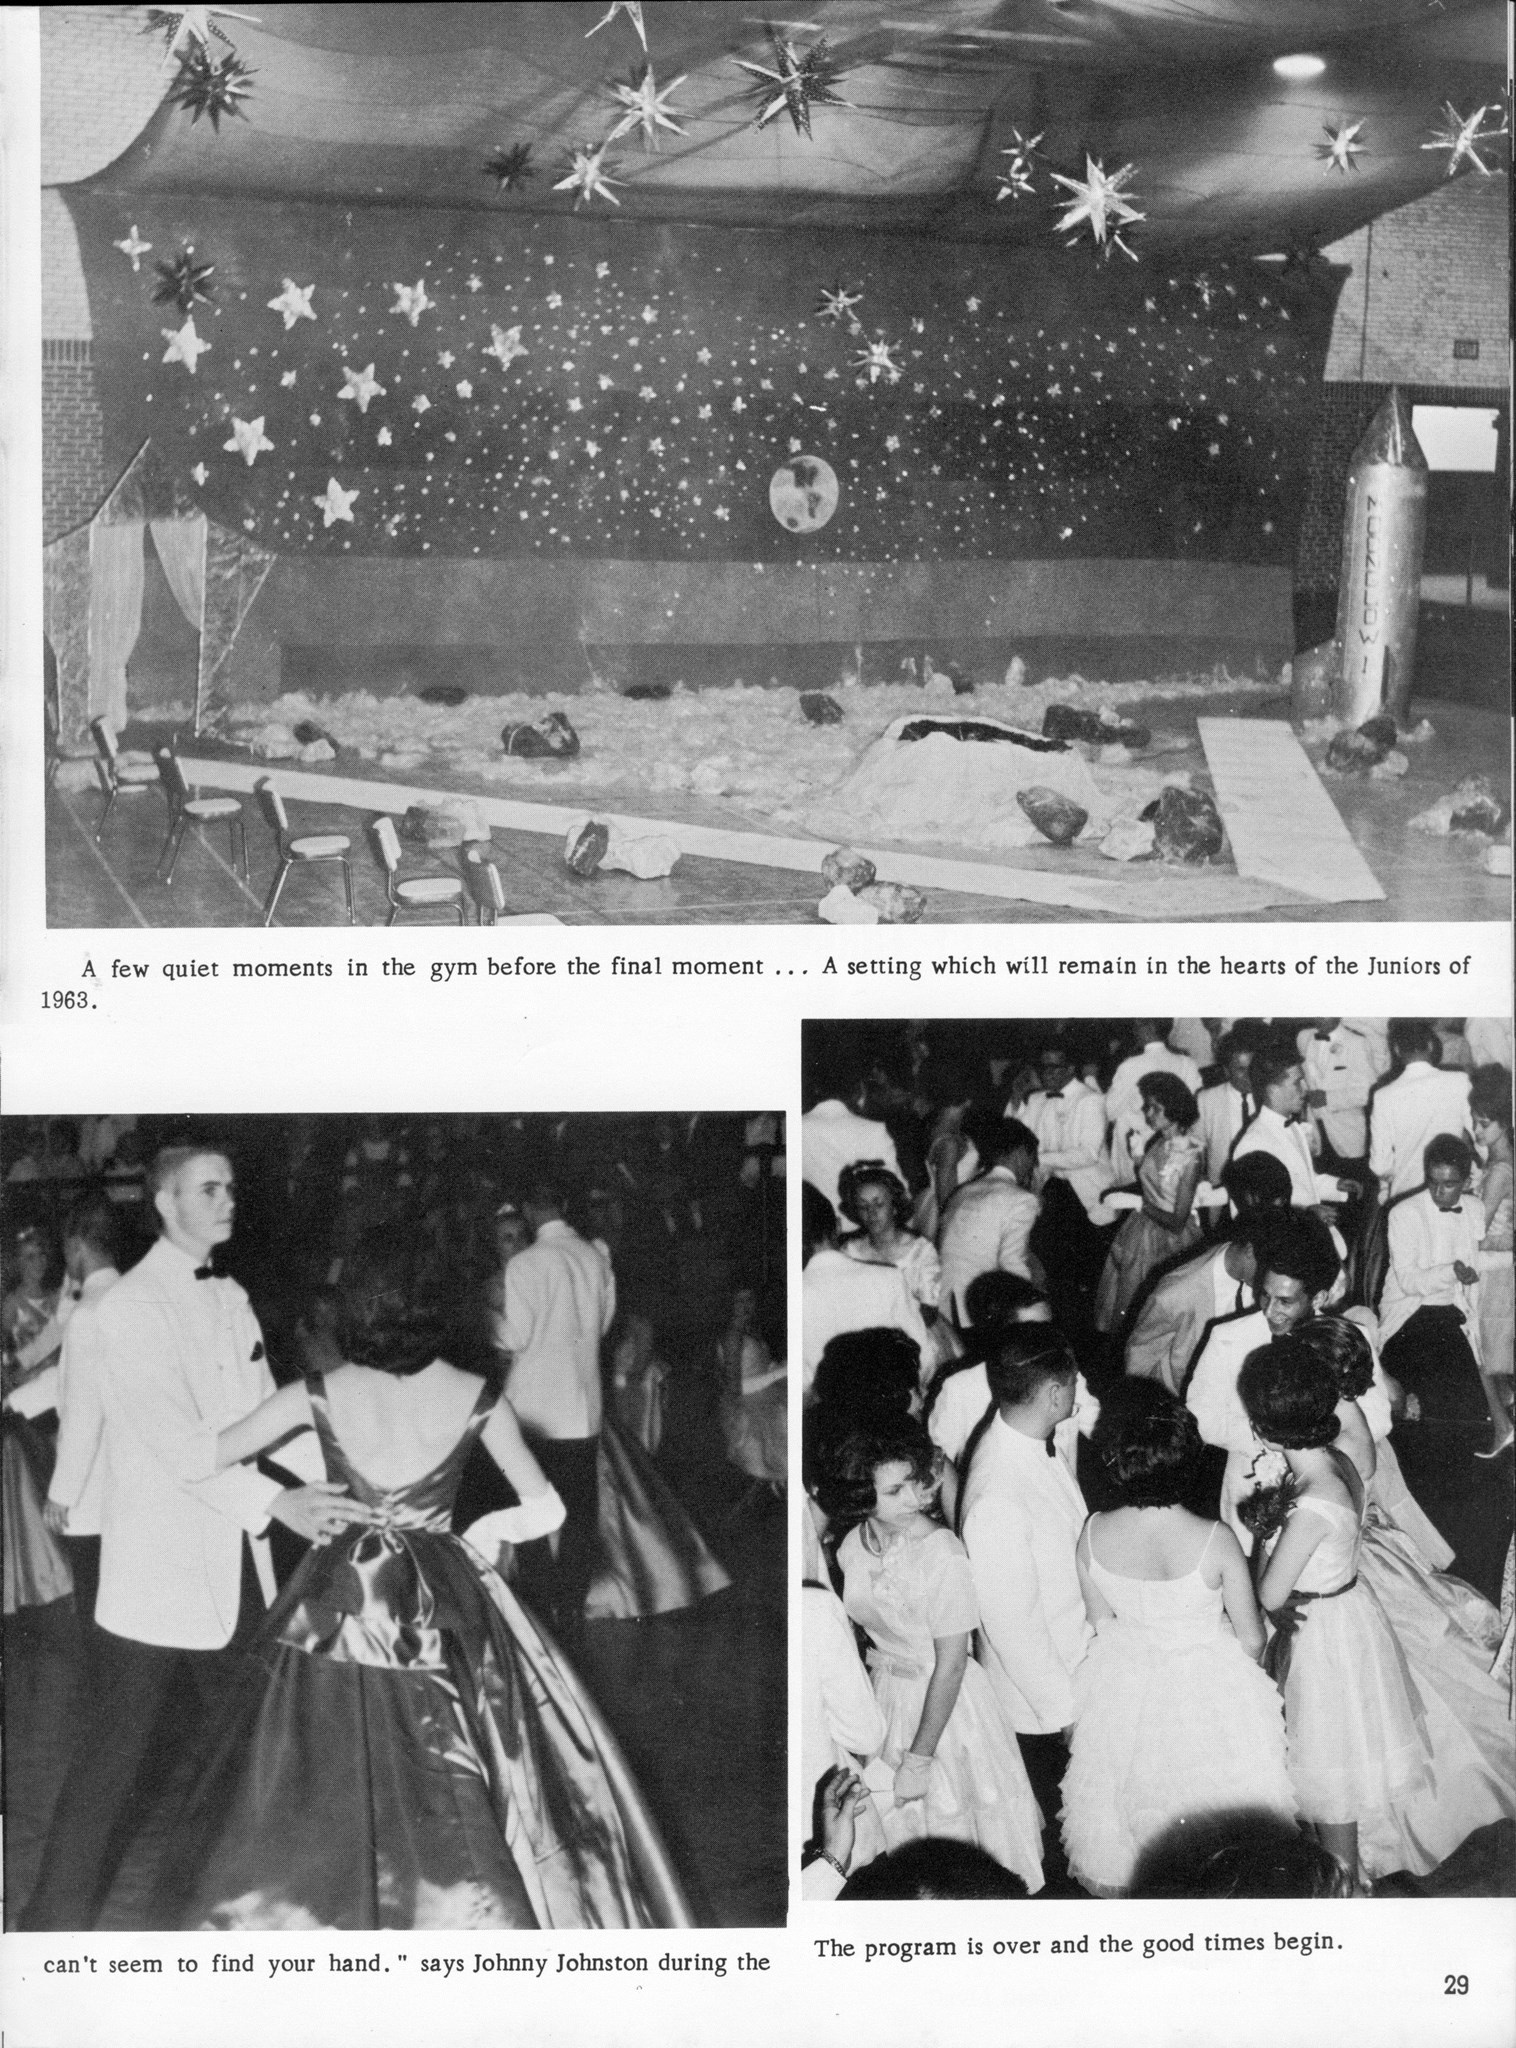 ../../../Images/Large/1963/Arclight-1963-pg0029.jpg